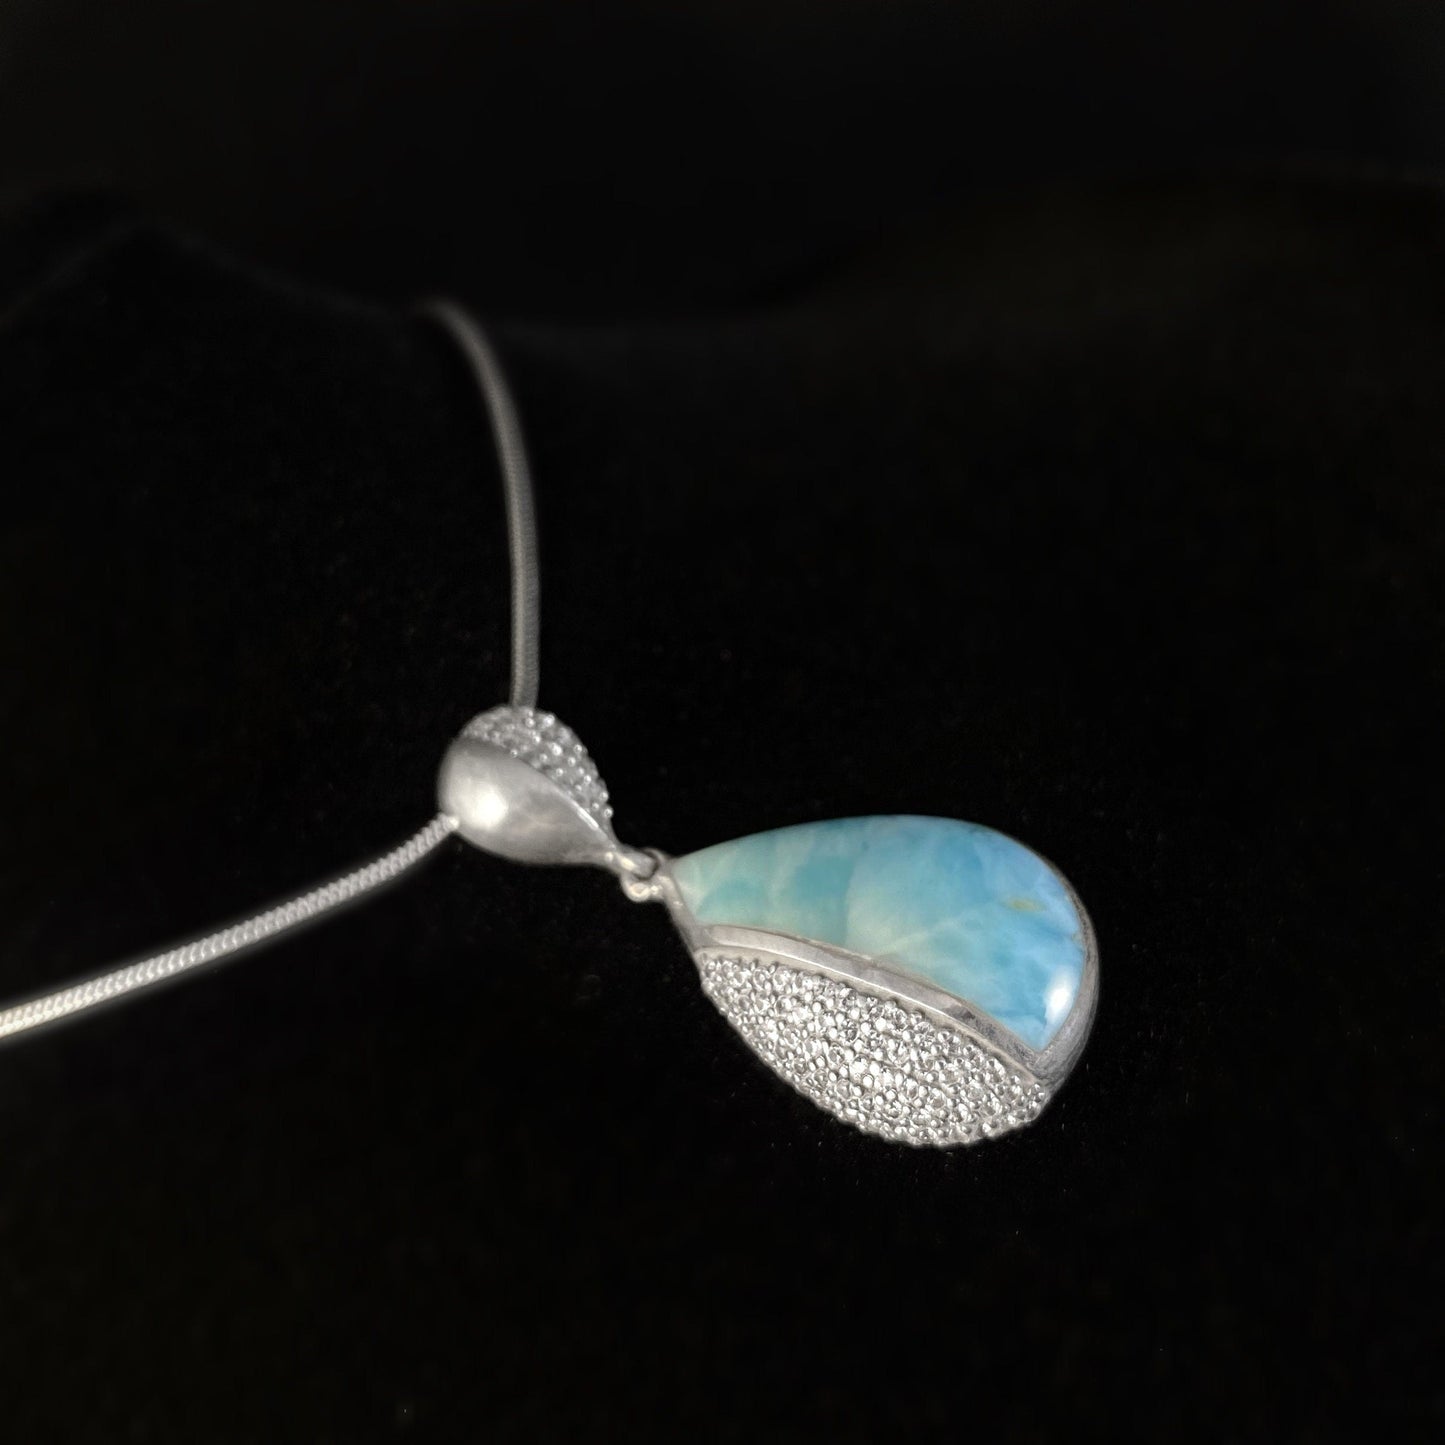 Marahlago Larimar and Sterling Silver Divine Necklace